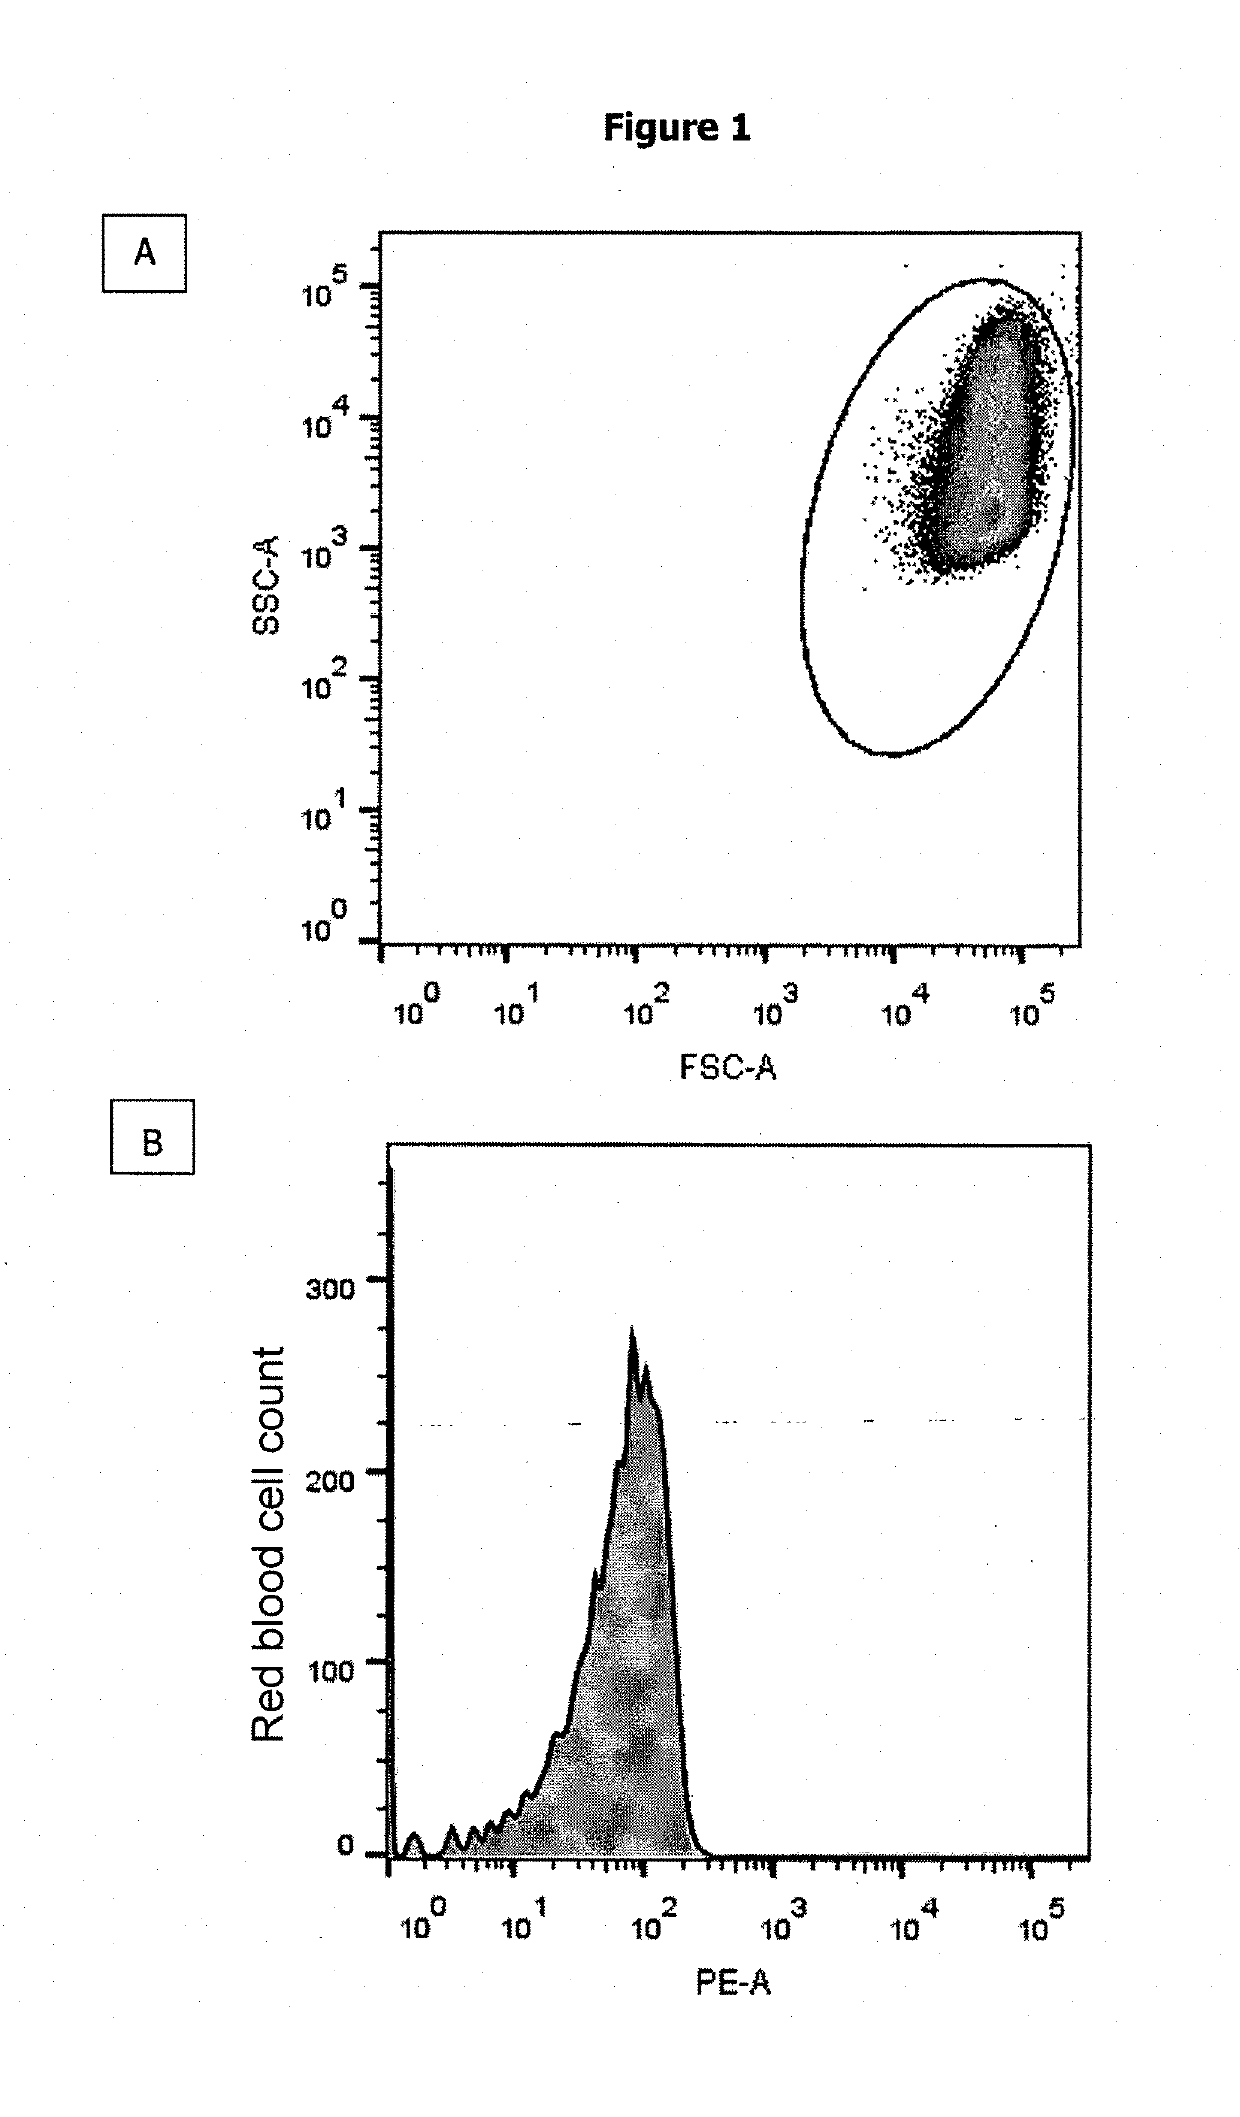 Method for Determining the Haemoglobin F Content of an Erythroid Cell